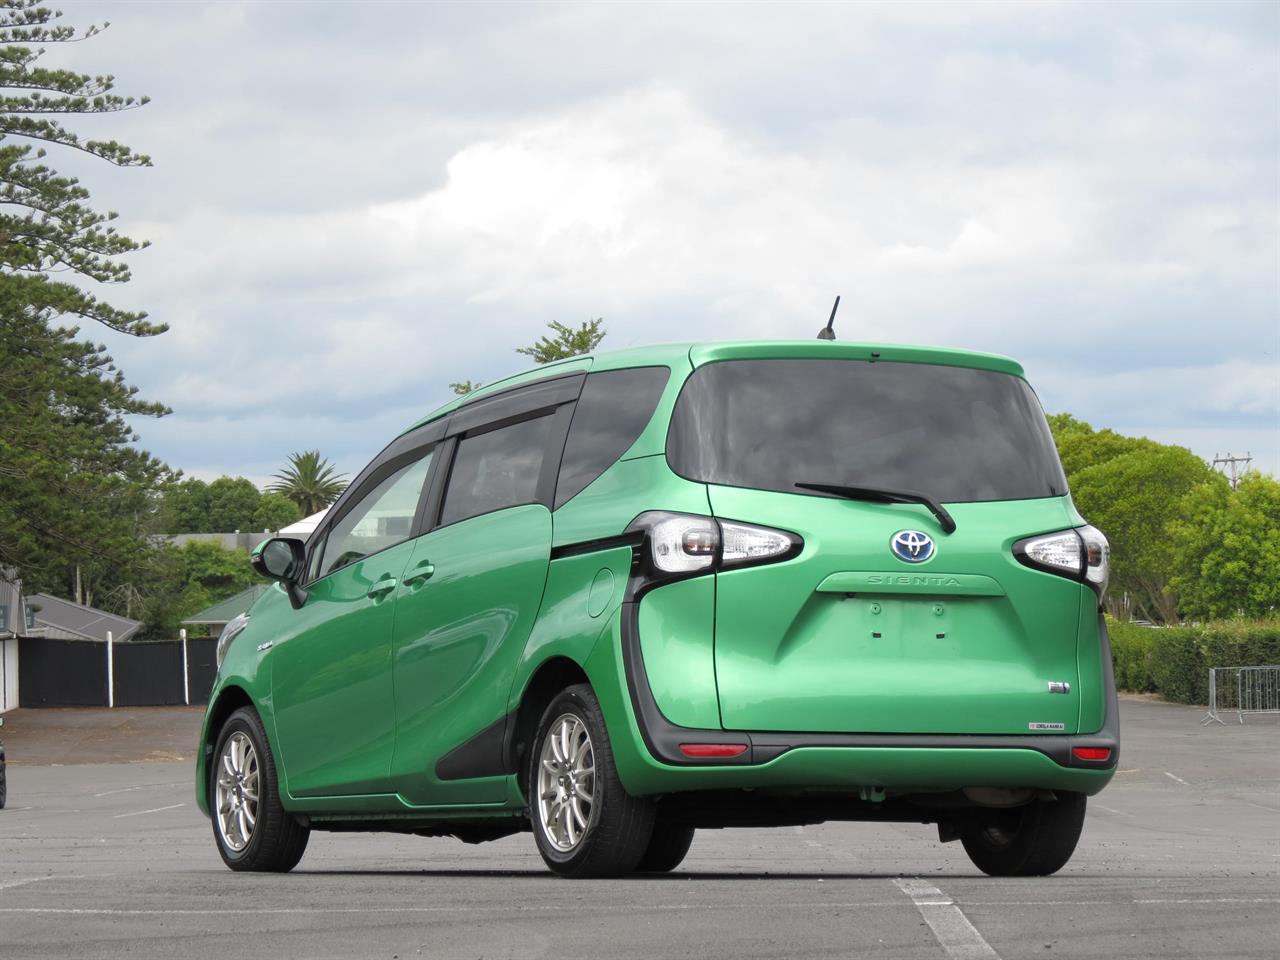 2016 Toyota Sienta only $61 weekly